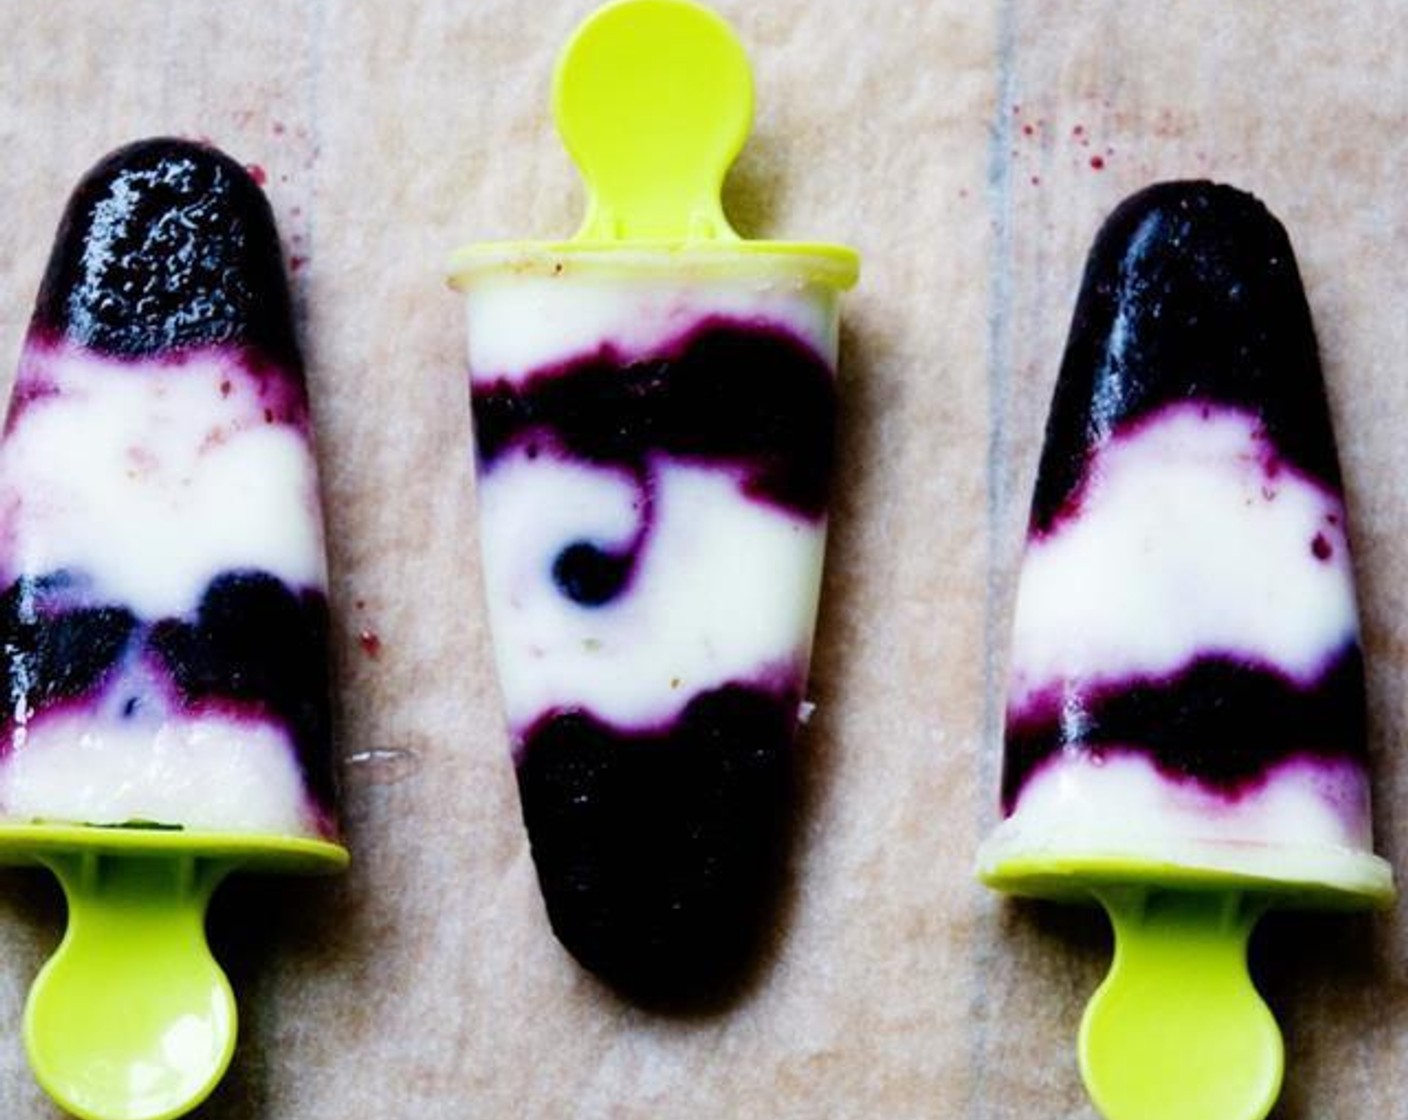 Blueberry and Yogurt Popsicles